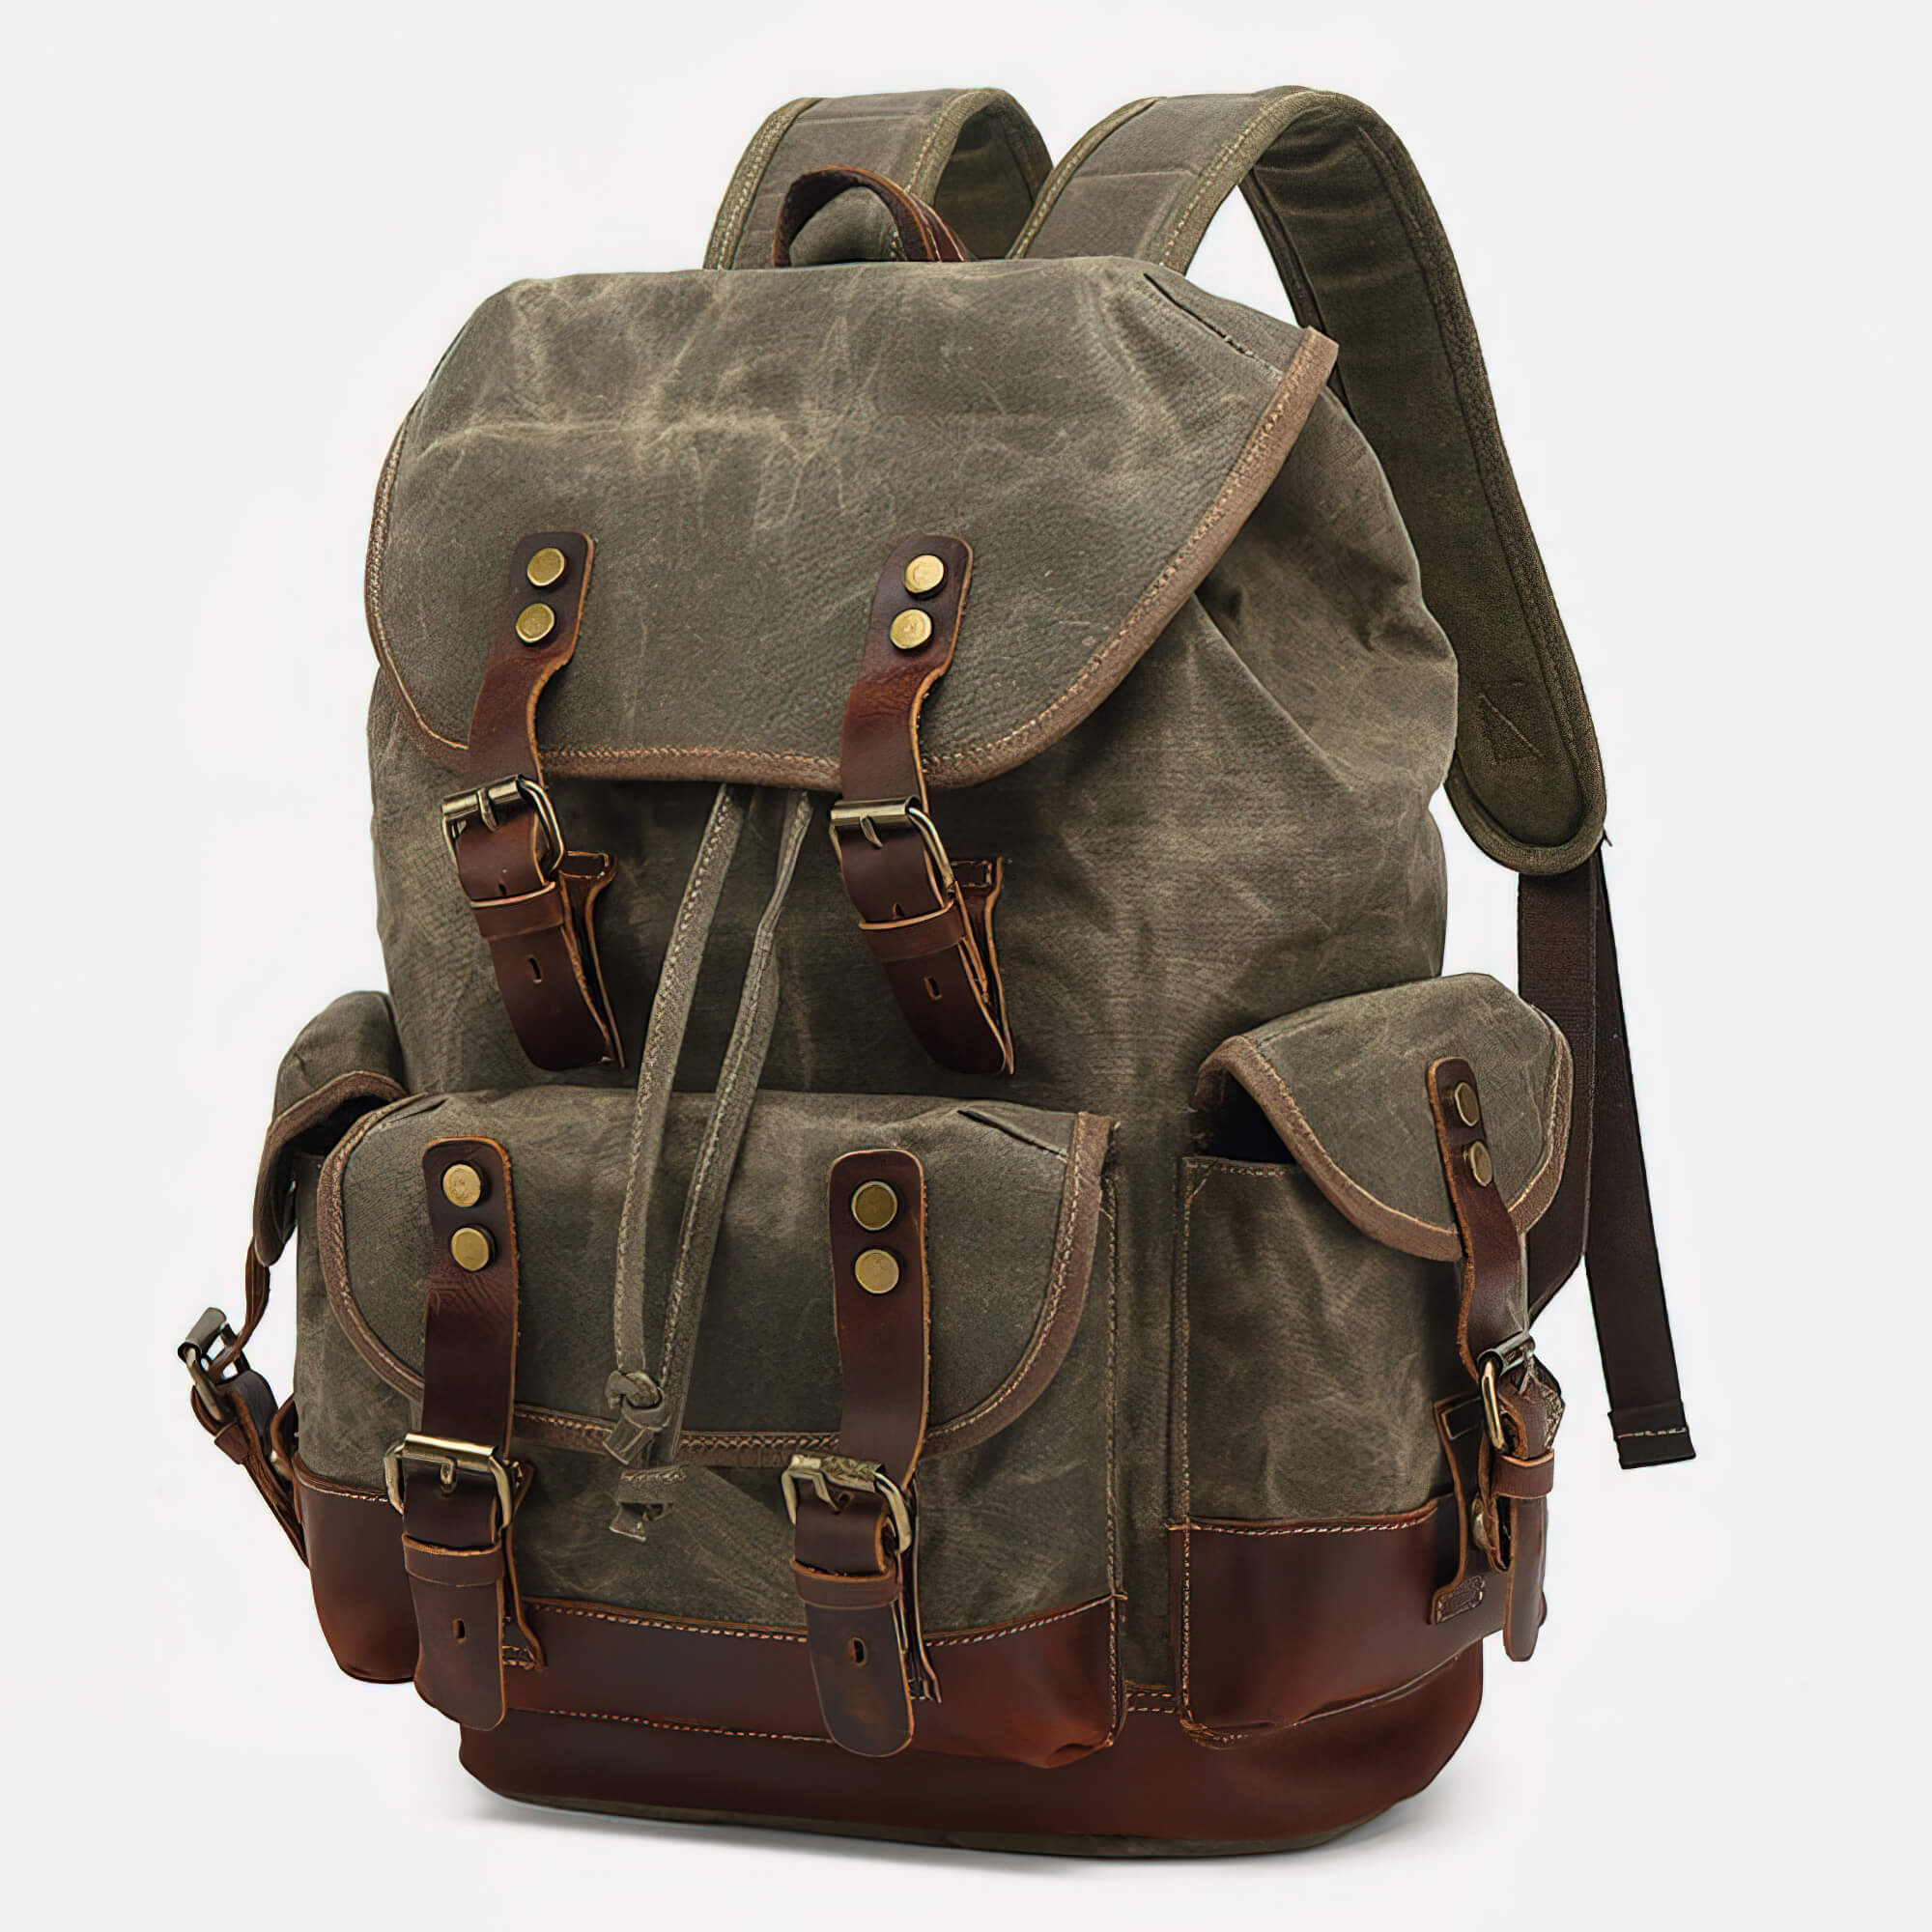 80L to 30L Size Options | Extra large | Handmade | Leather | Waxed Canvas  Backpack | Camping, Hunting, Bushcraft, Travel | Personalization